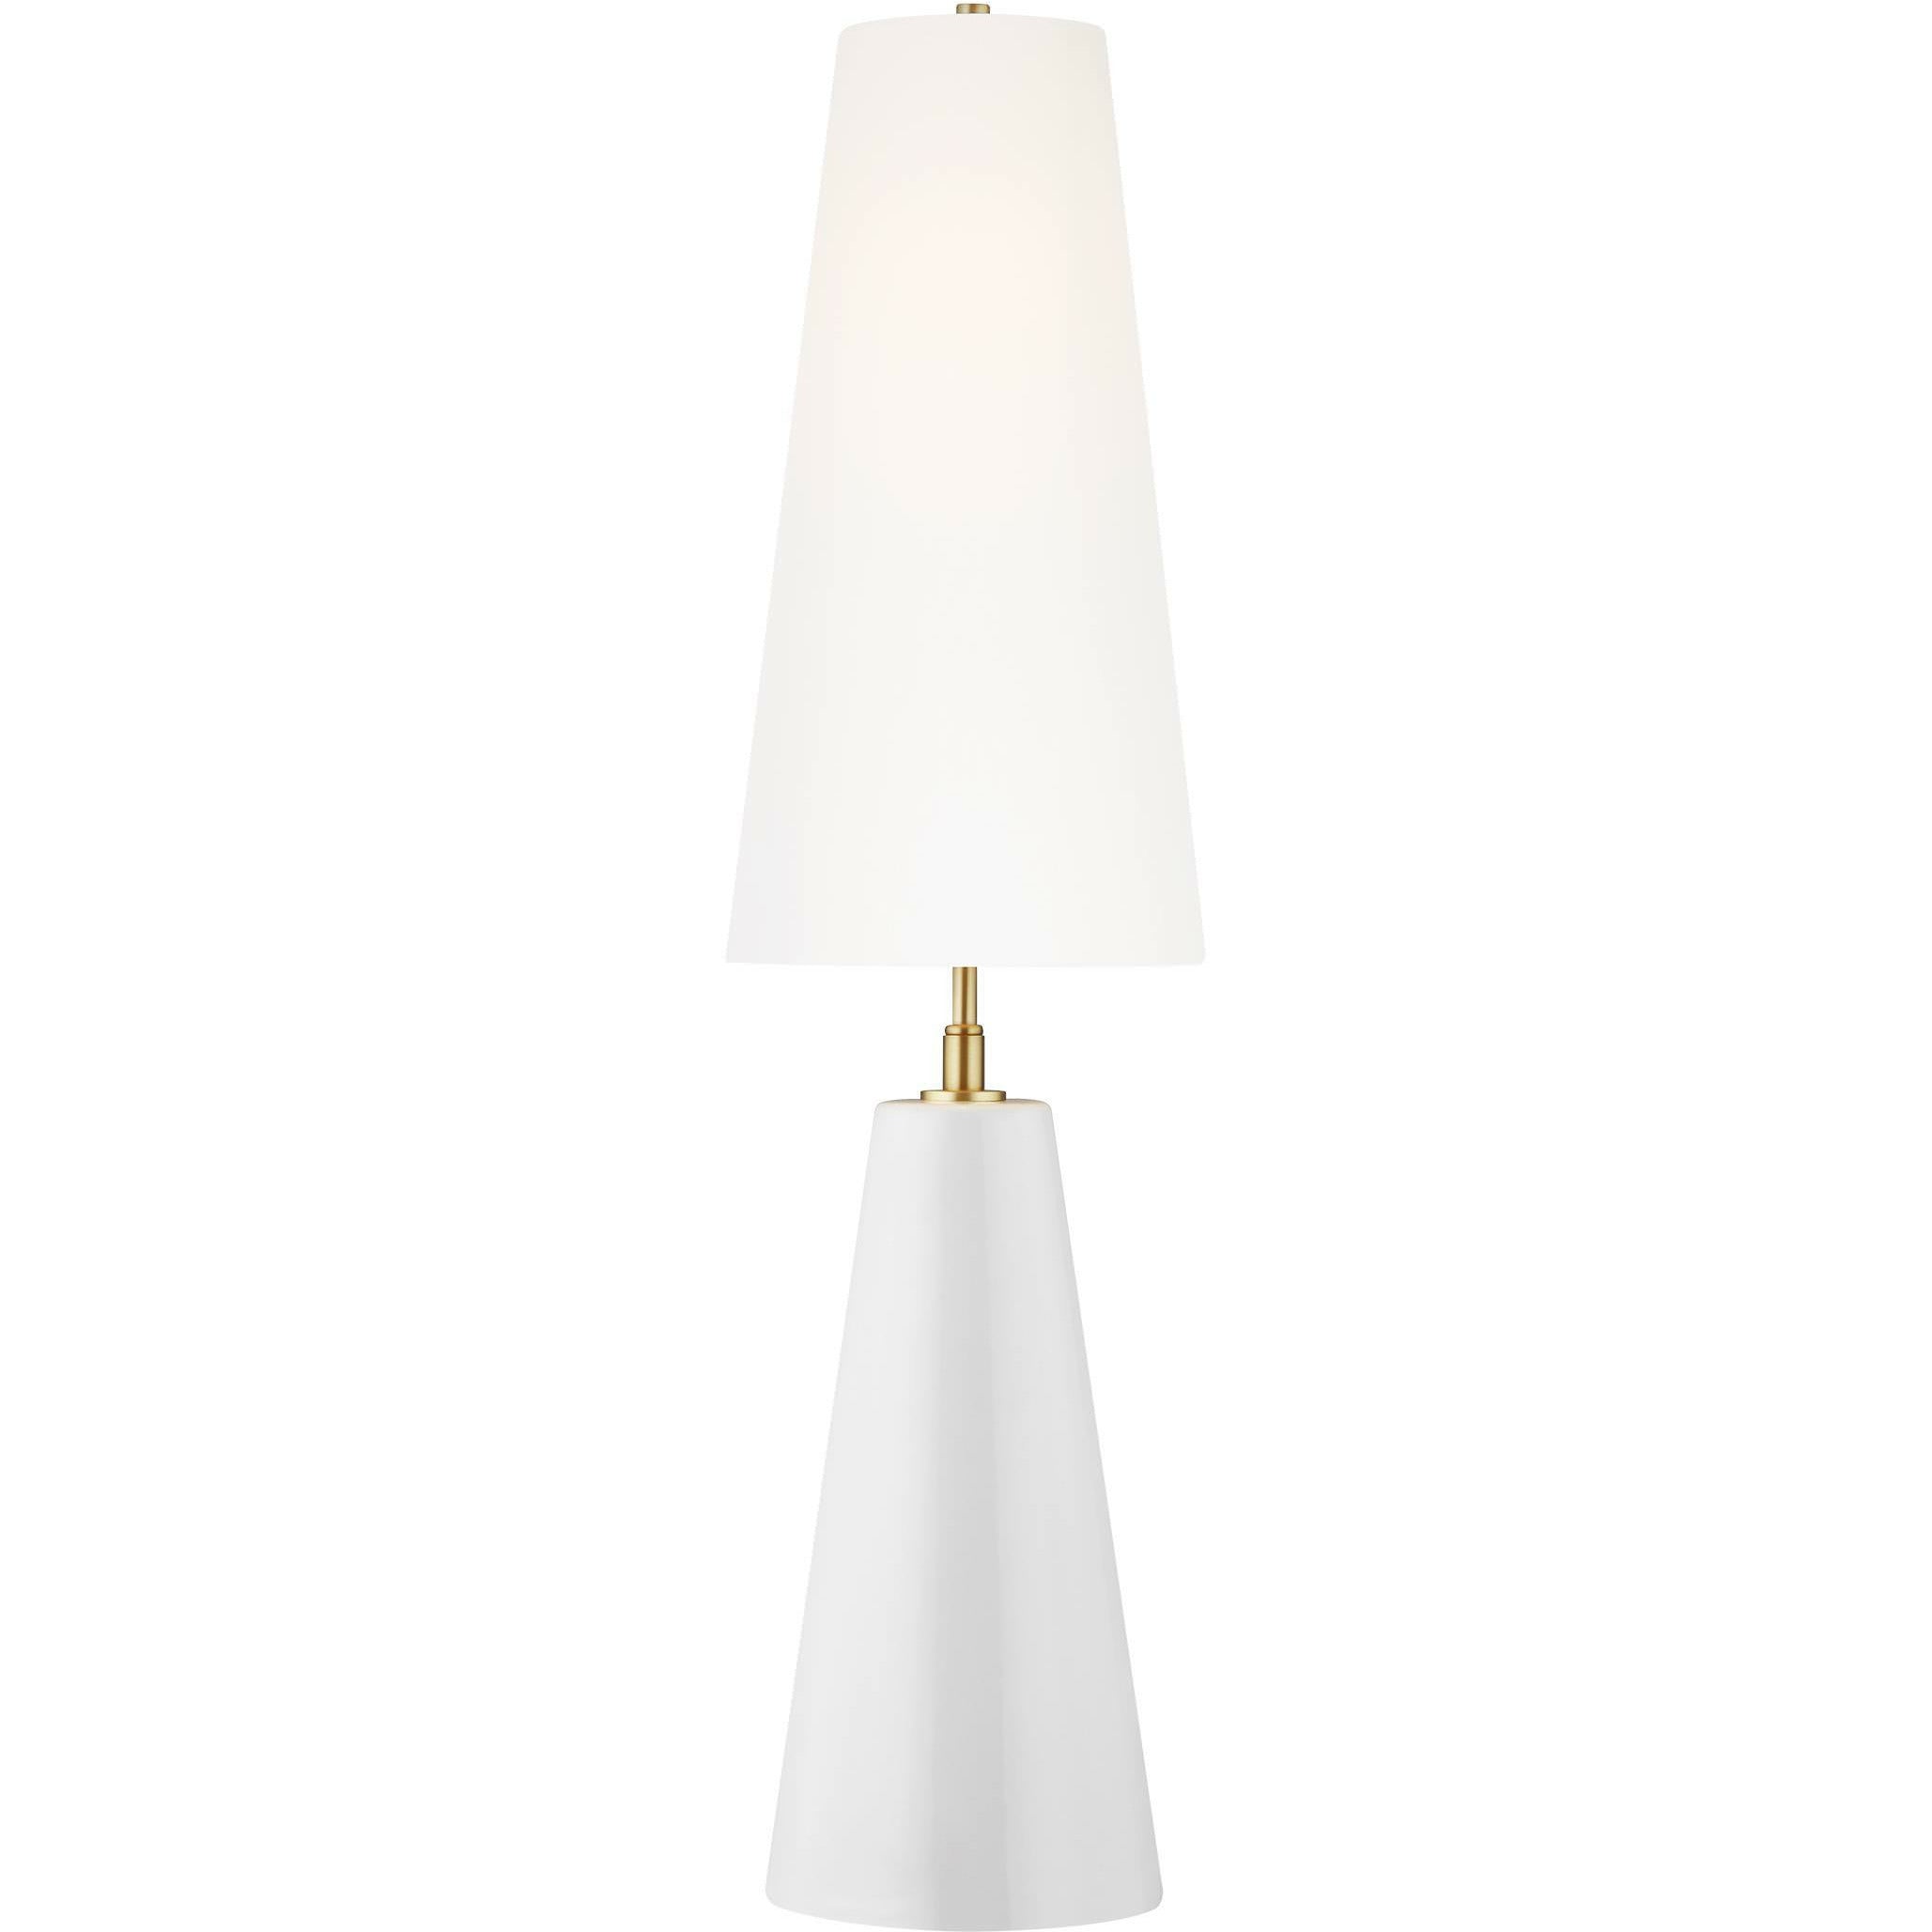 Lorne Table Lamp Arctic White / Burnished Brass